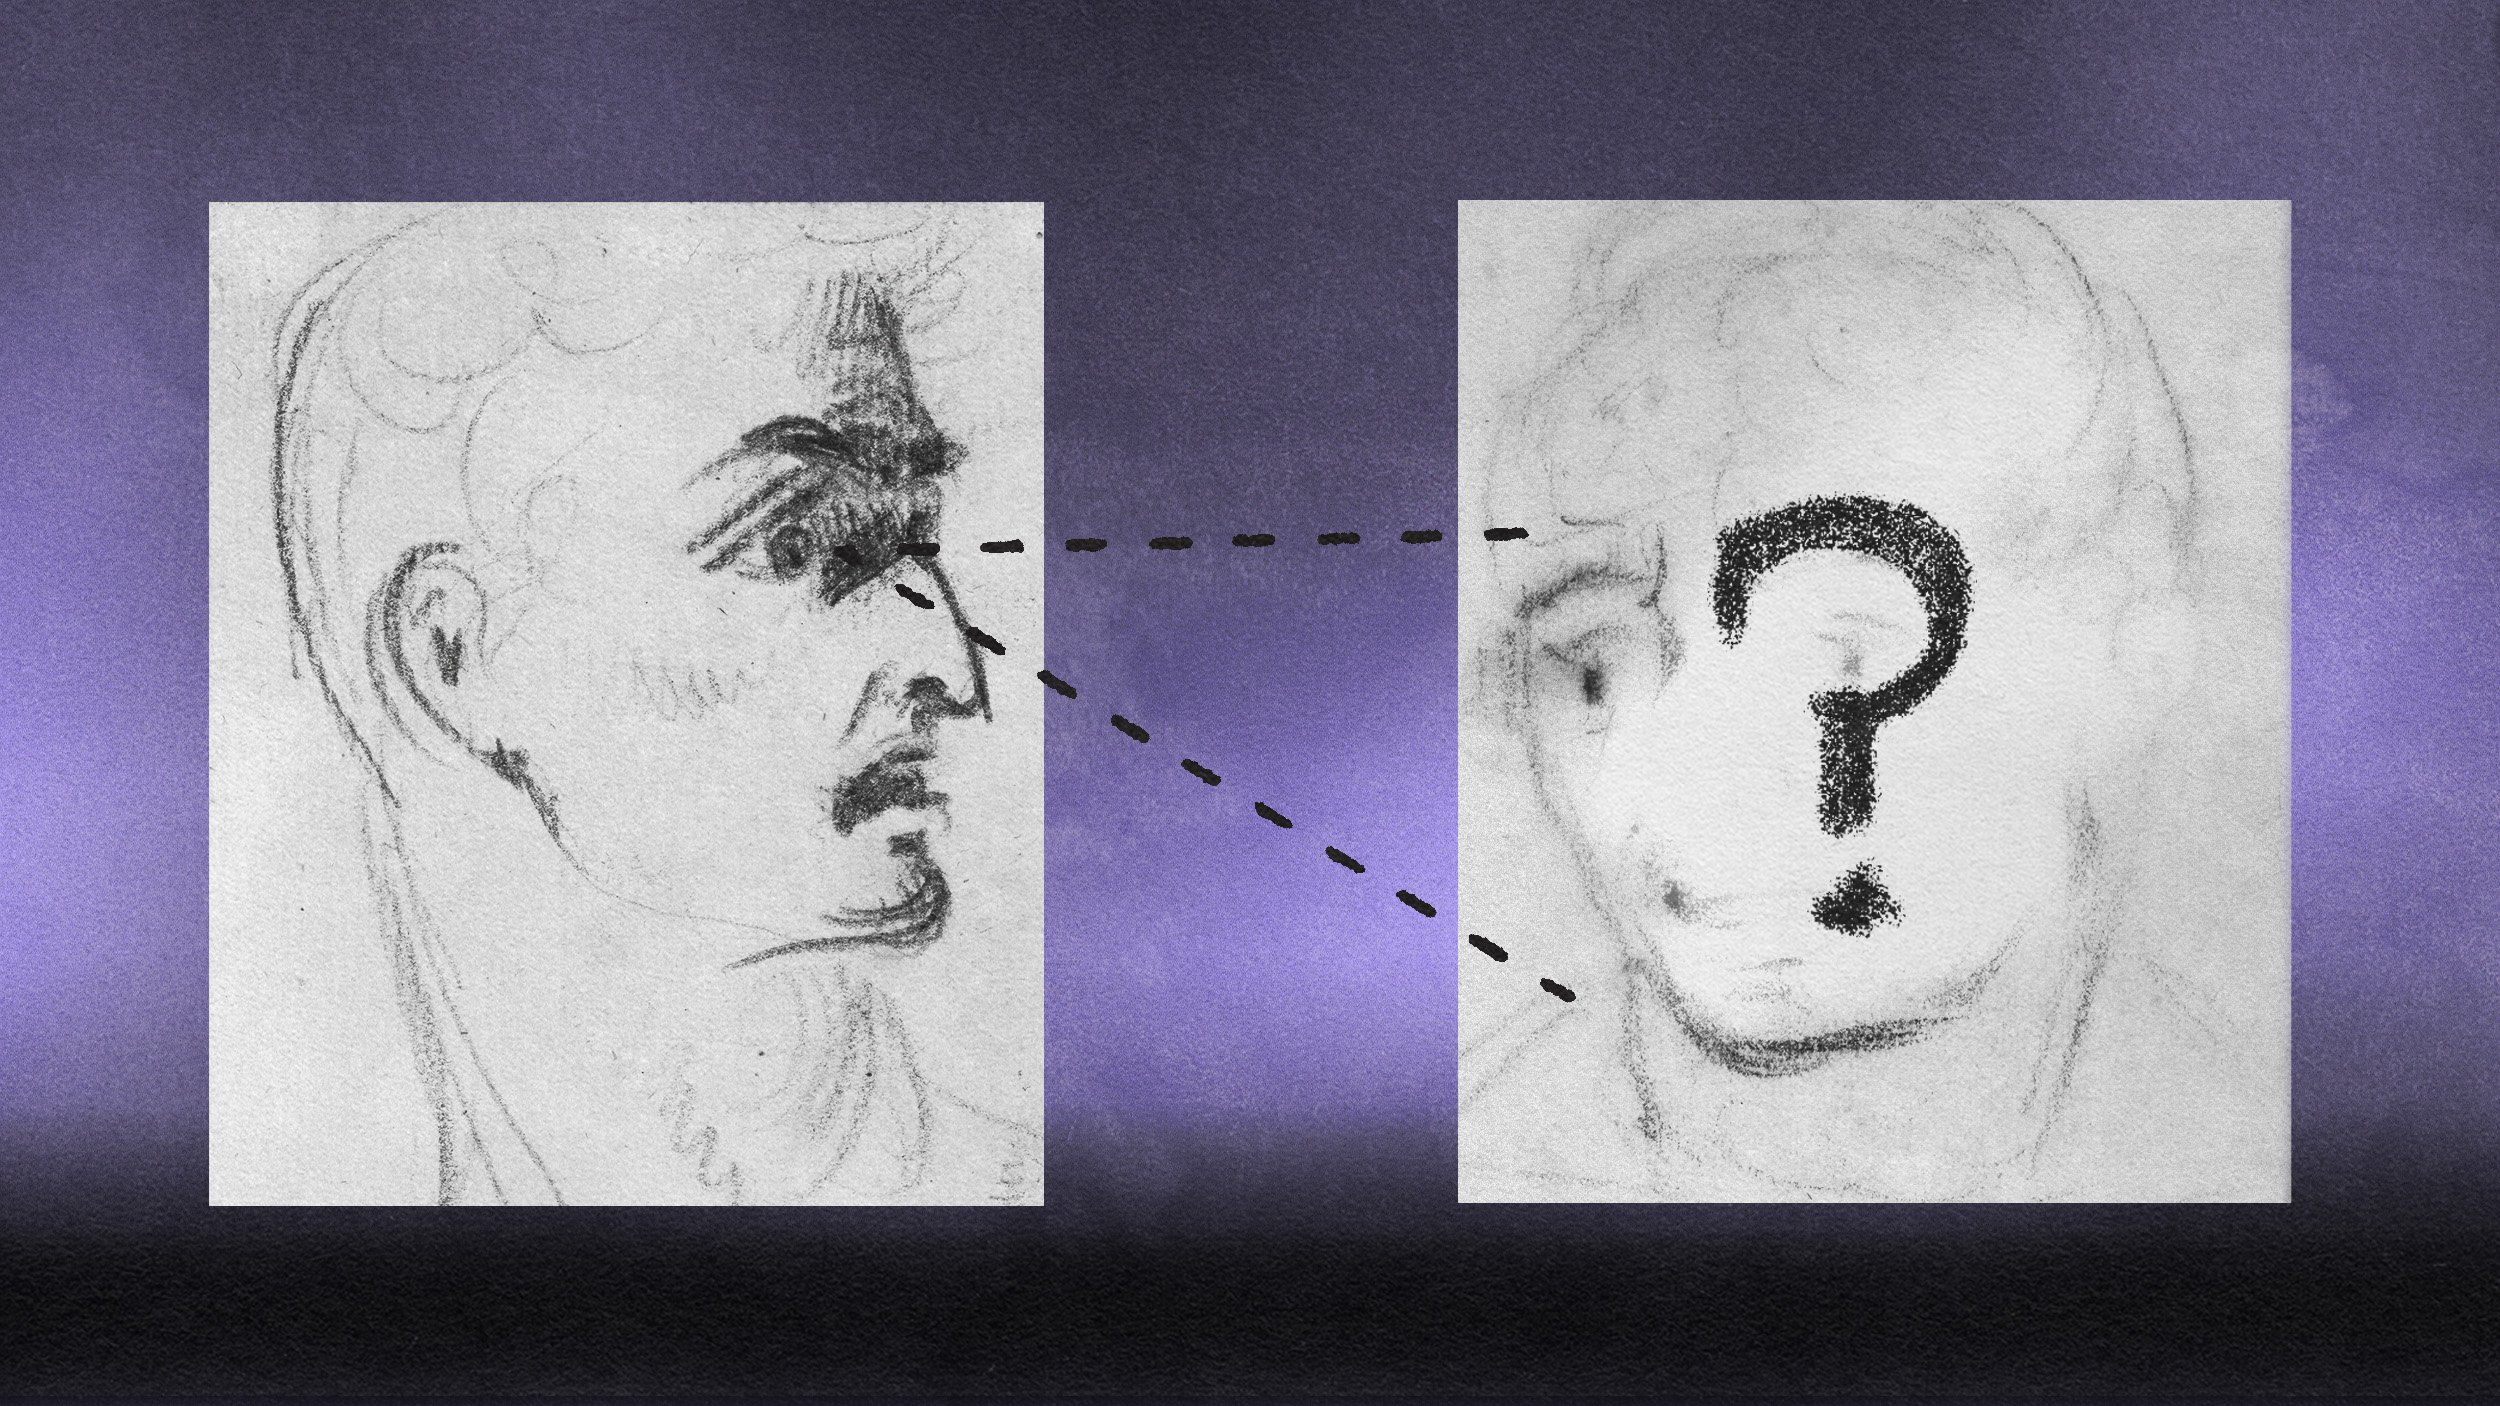 A drawing shows a person's side profile on the left, with dashed lines leading to a second drawing on the right where the facial features are replaced by a question mark, hinting at a lack of perceptivity.